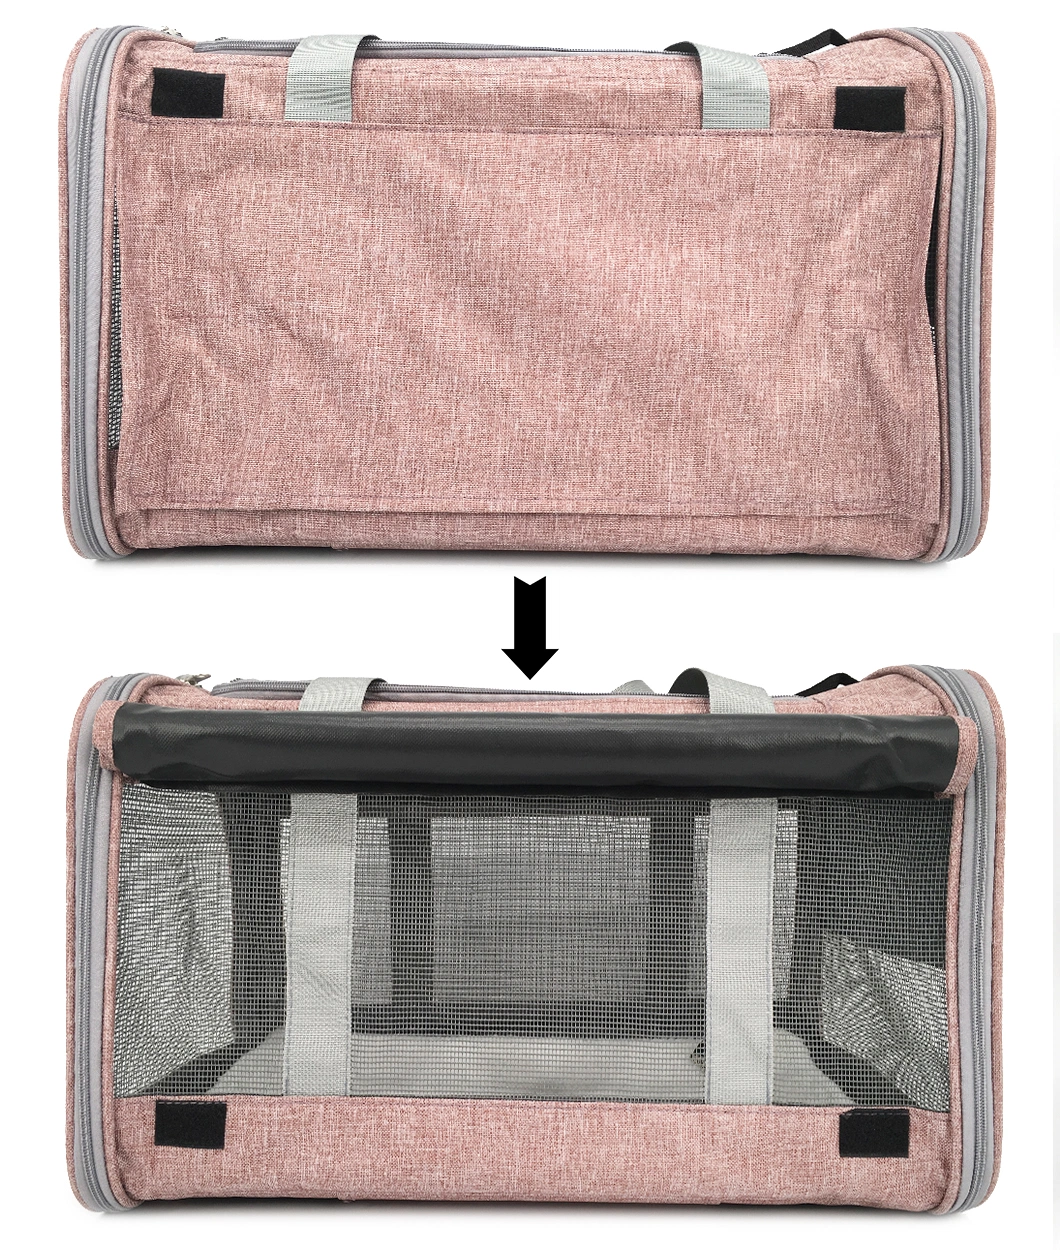 Small Pet Carrier/Cat Carrier/Kitten Carrier/ Dog Breed Carrier/Soft Fleece Pads/Washable/Pet Pursetravel Tote/Kennel/Foldable/Portable Crate/Shoulder Strap